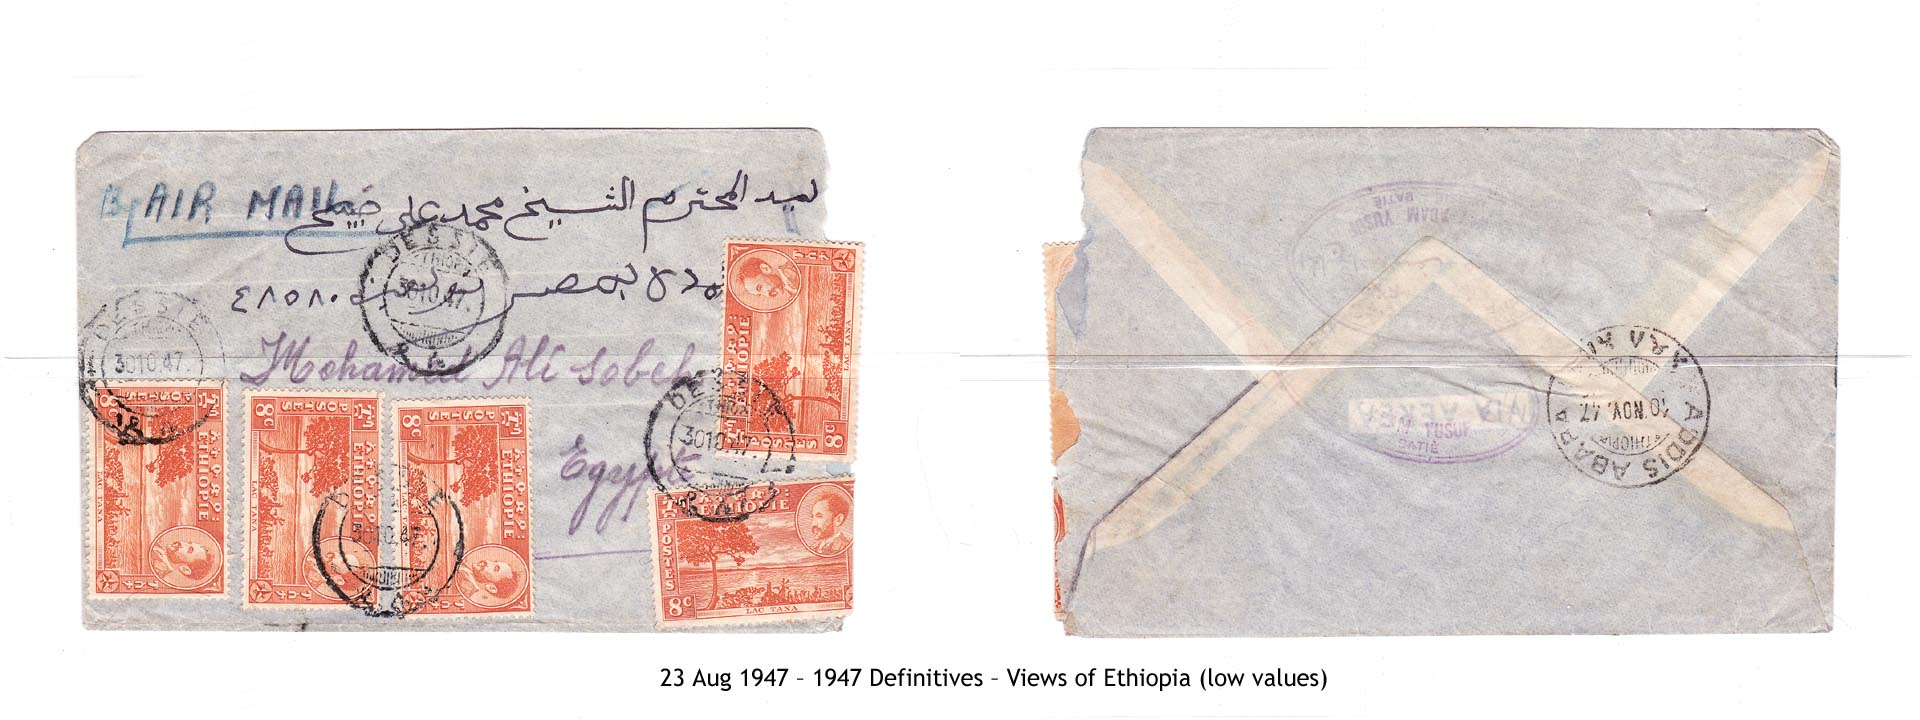 19470823 – 1947 Definitives – Views of Ethiopia (low values)